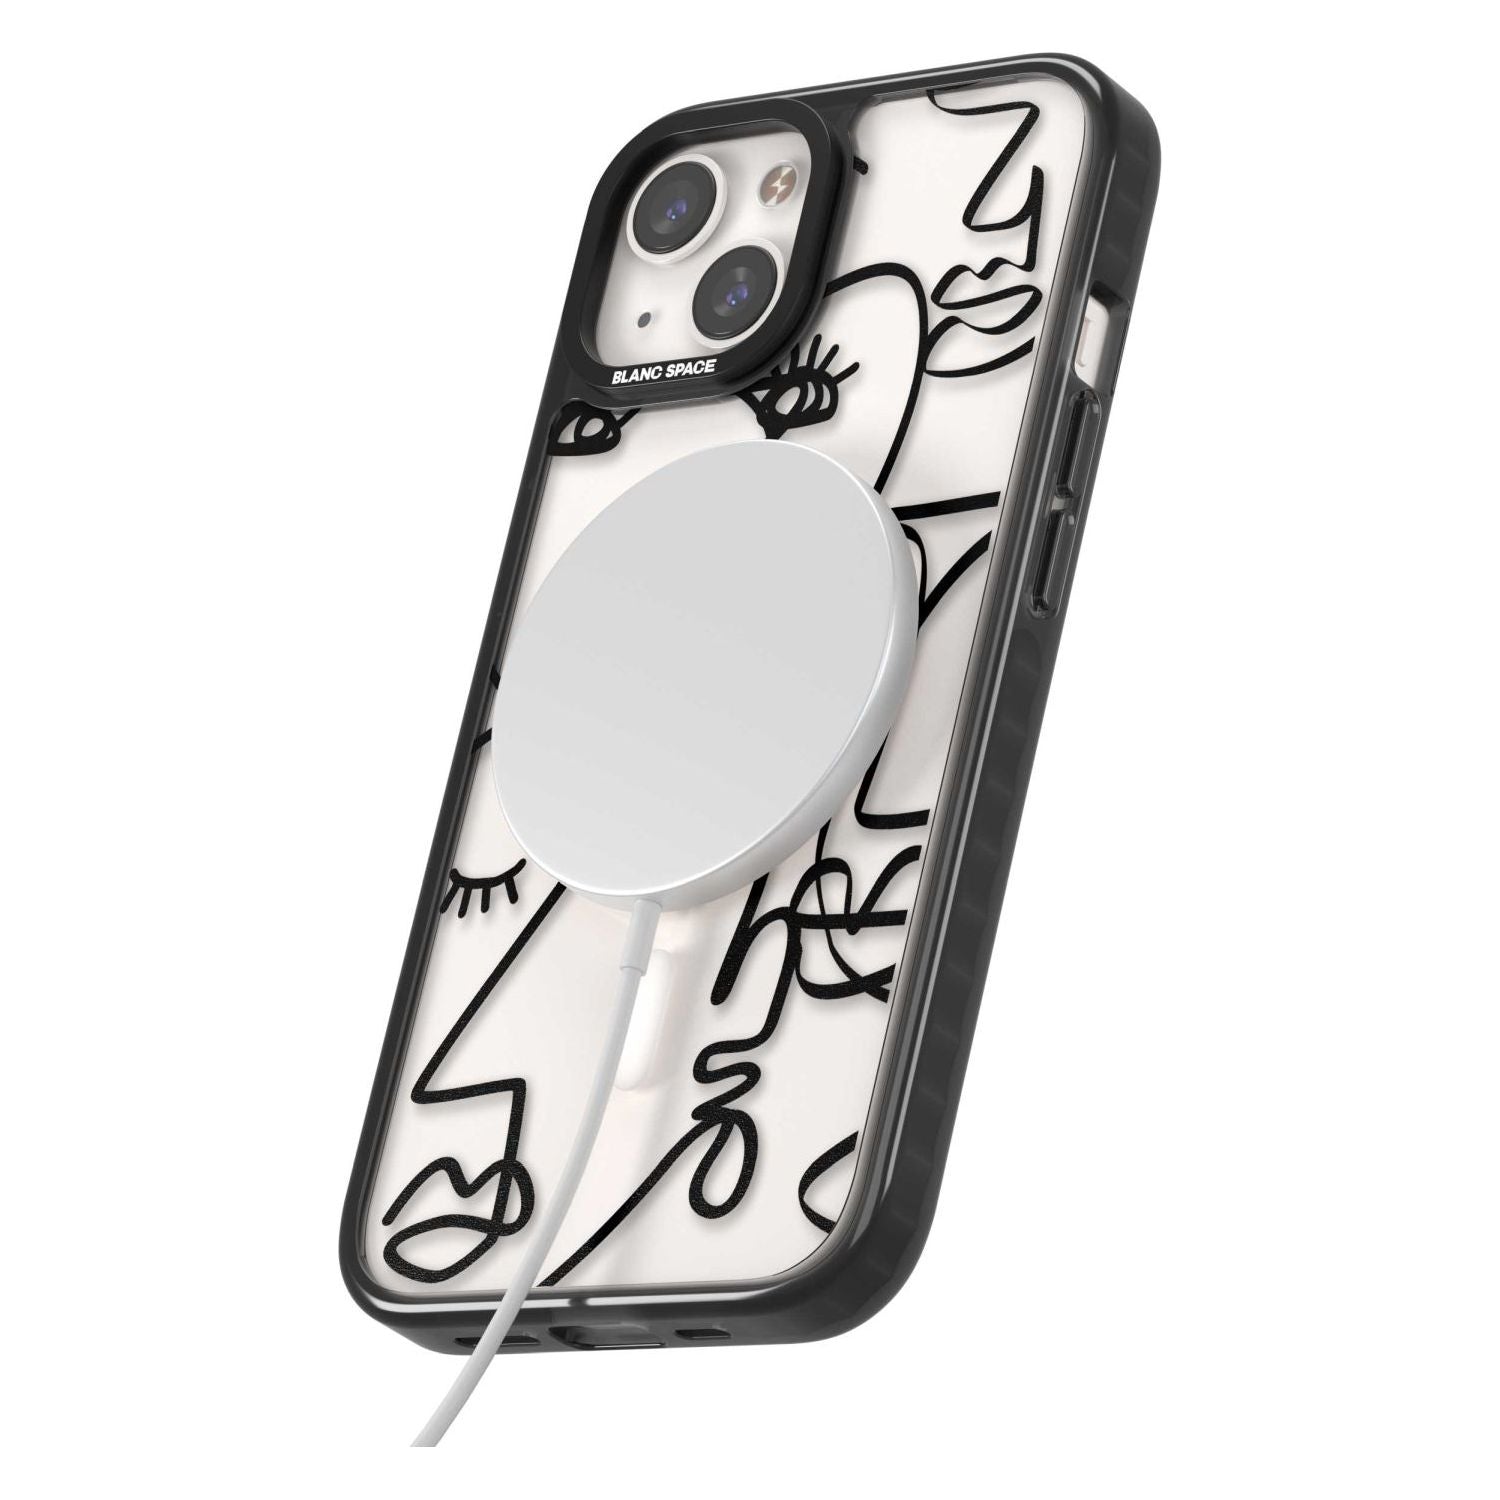 Abstract Continuous Line Faces Black on Clear Phone Case iPhone 15 Pro Max / Black Impact Case,iPhone 15 Plus / Black Impact Case,iPhone 15 Pro / Black Impact Case,iPhone 15 / Black Impact Case,iPhone 15 Pro Max / Impact Case,iPhone 15 Plus / Impact Case,iPhone 15 Pro / Impact Case,iPhone 15 / Impact Case,iPhone 15 Pro Max / Magsafe Black Impact Case,iPhone 15 Plus / Magsafe Black Impact Case,iPhone 15 Pro / Magsafe Black Impact Case,iPhone 15 / Magsafe Black Impact Case,iPhone 14 Pro Max / Black Impact Cas